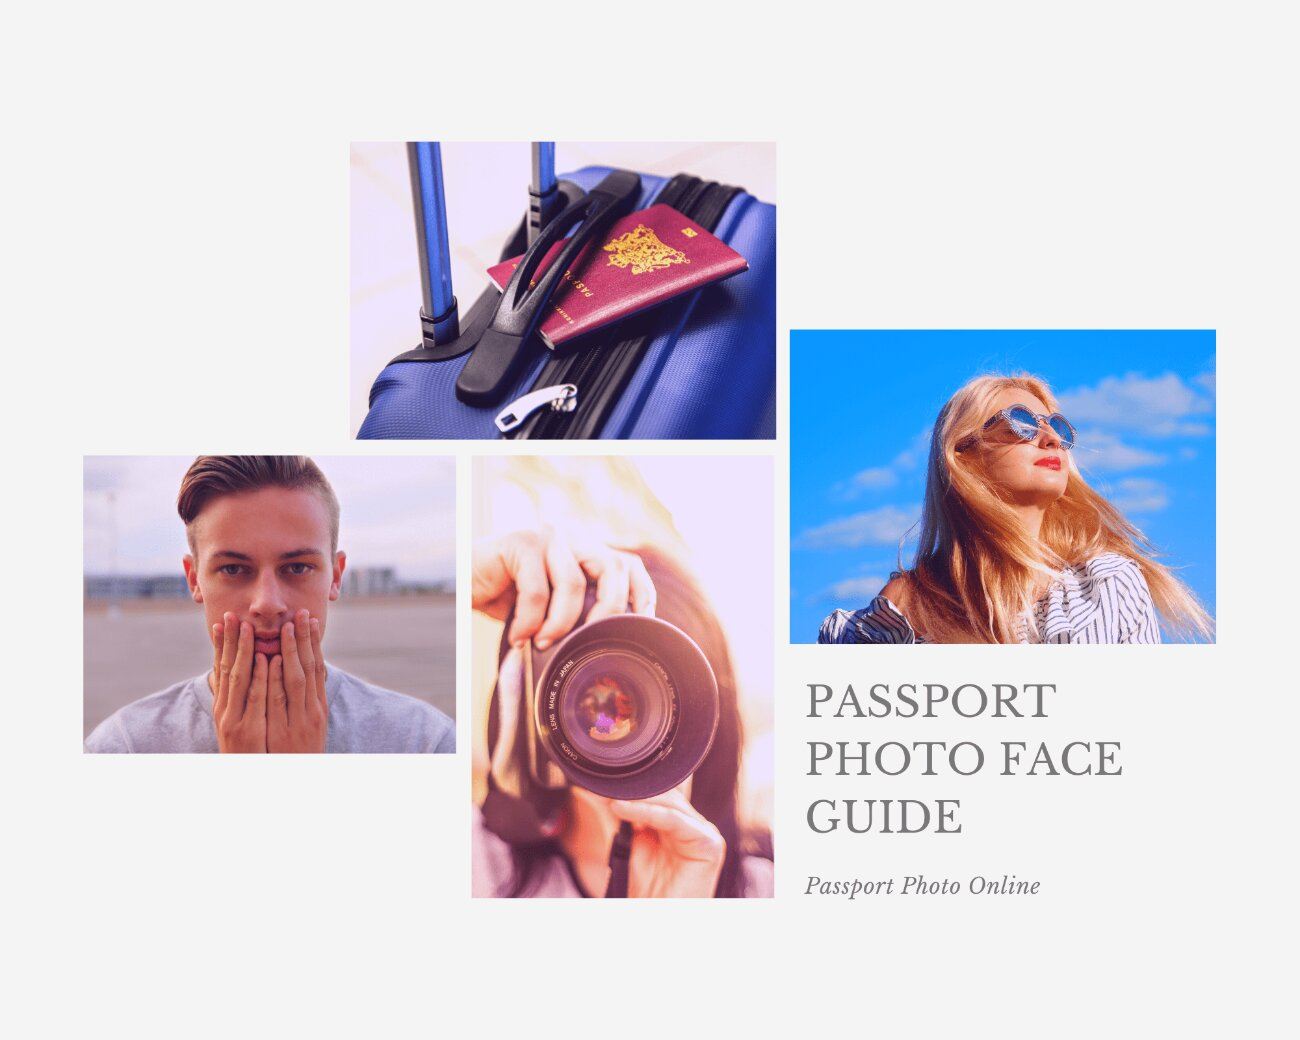 Passport on suitcase with a man with his hands on his face